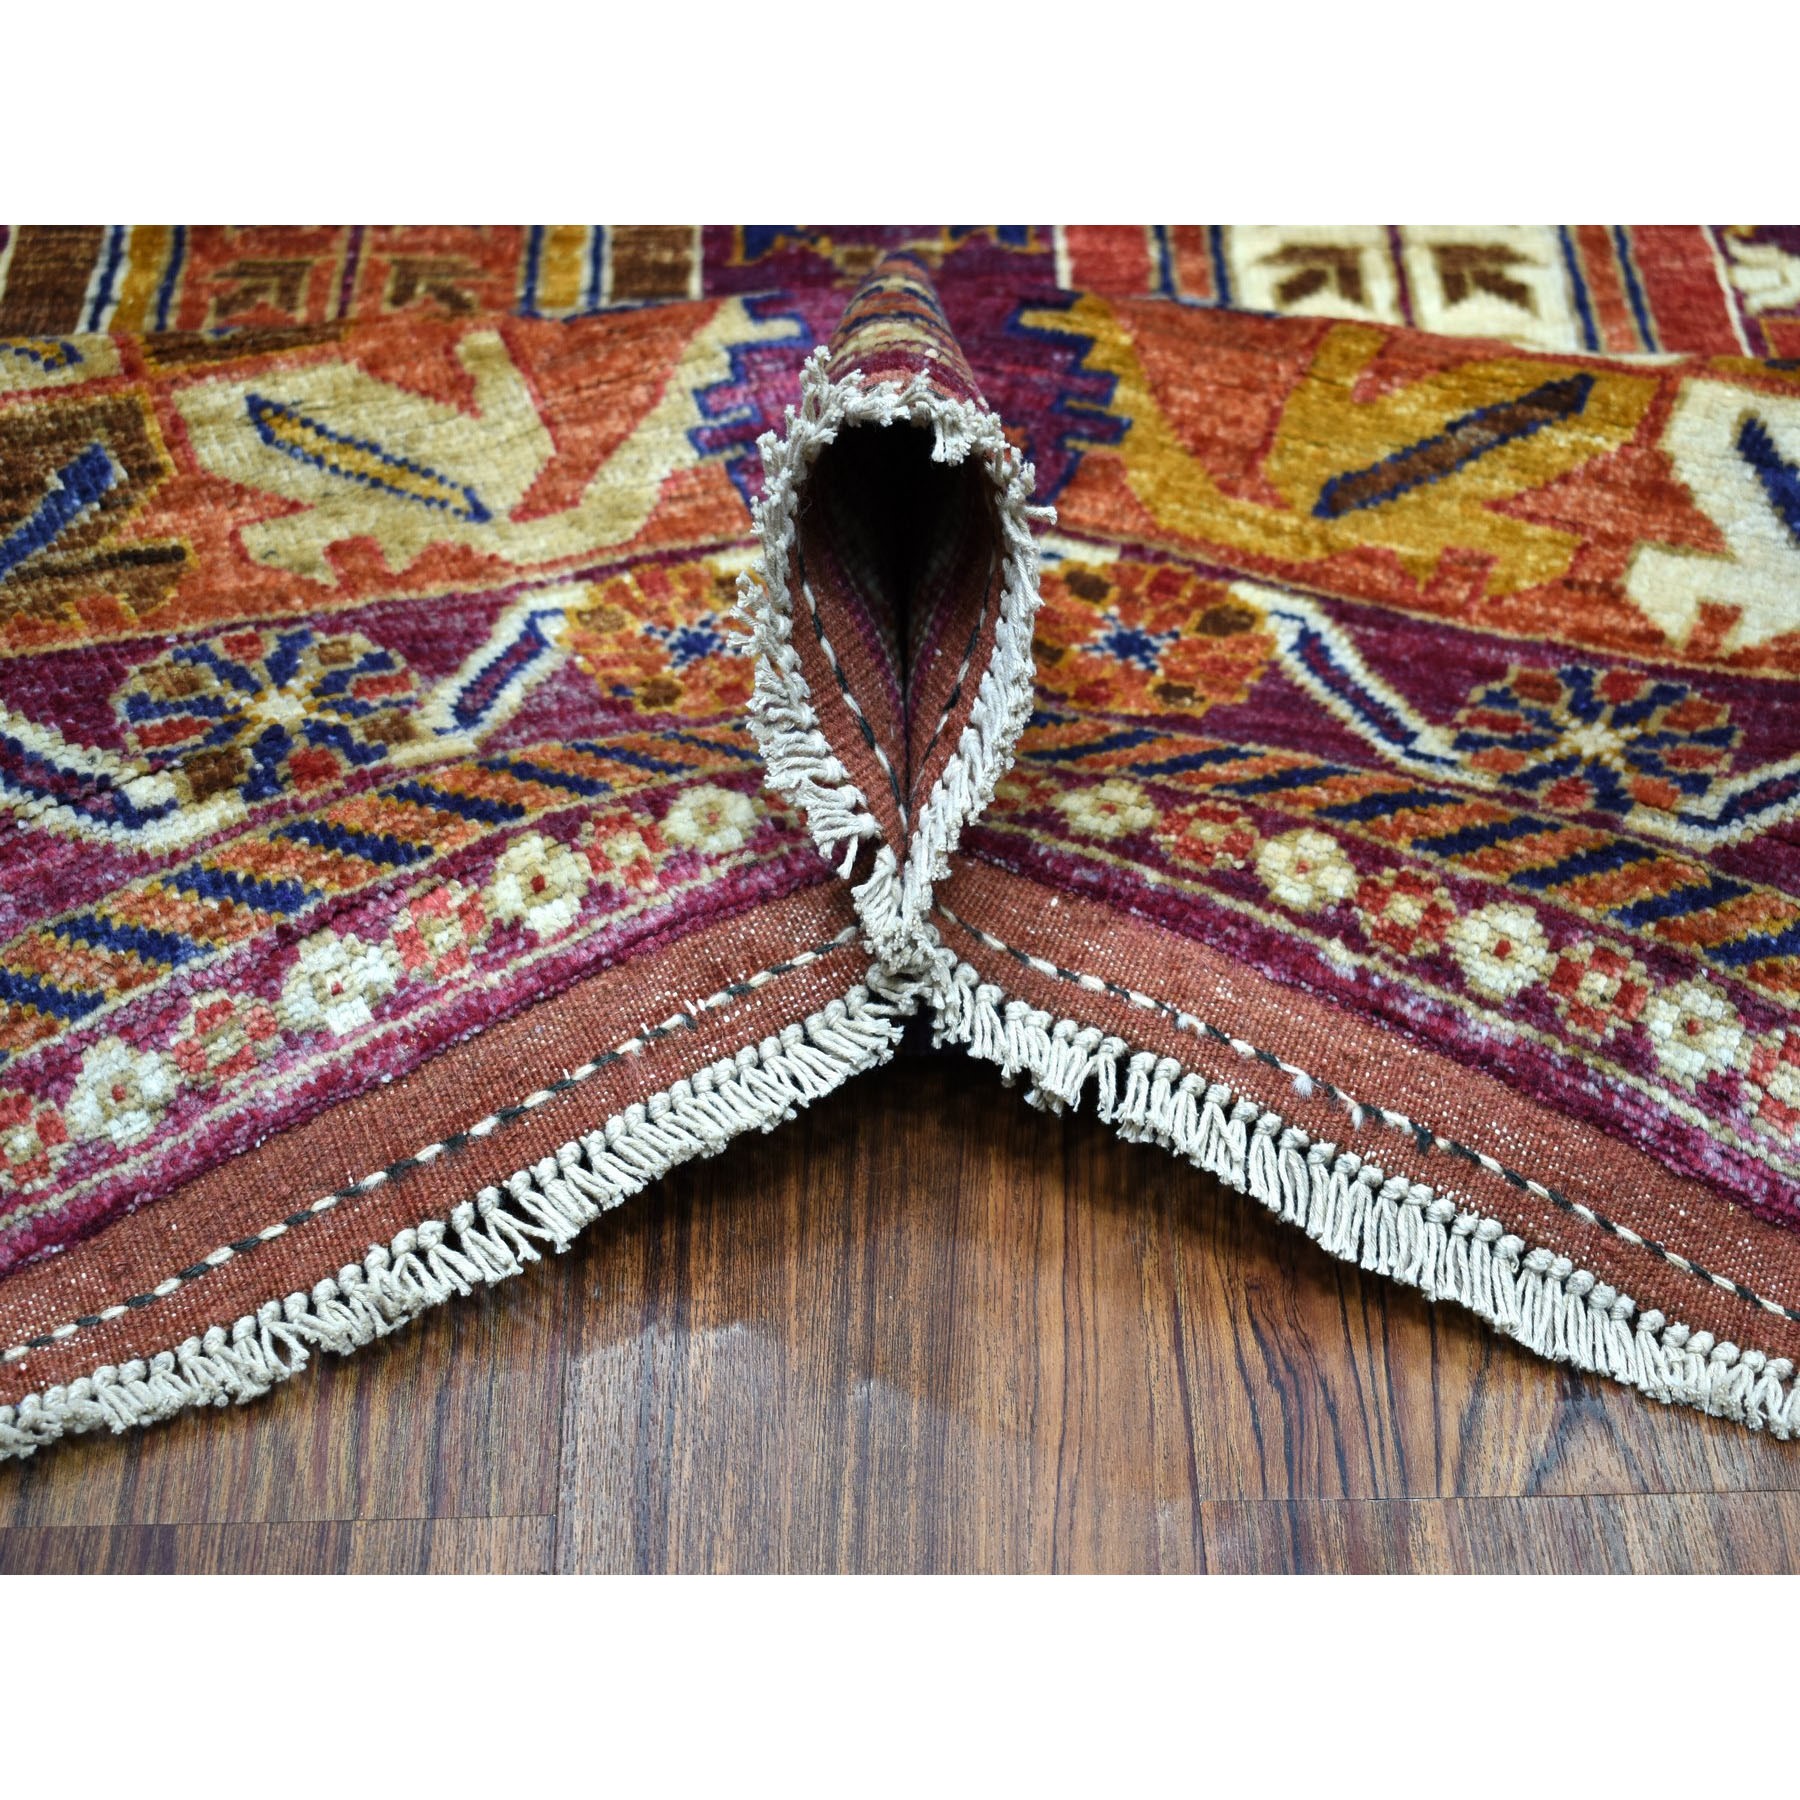 8-1 x9-10  Afghan Ersari Natural Dyes Soft Pile Colorful Geometric Design Hand Knotted 100%Wool Oriental Rug 